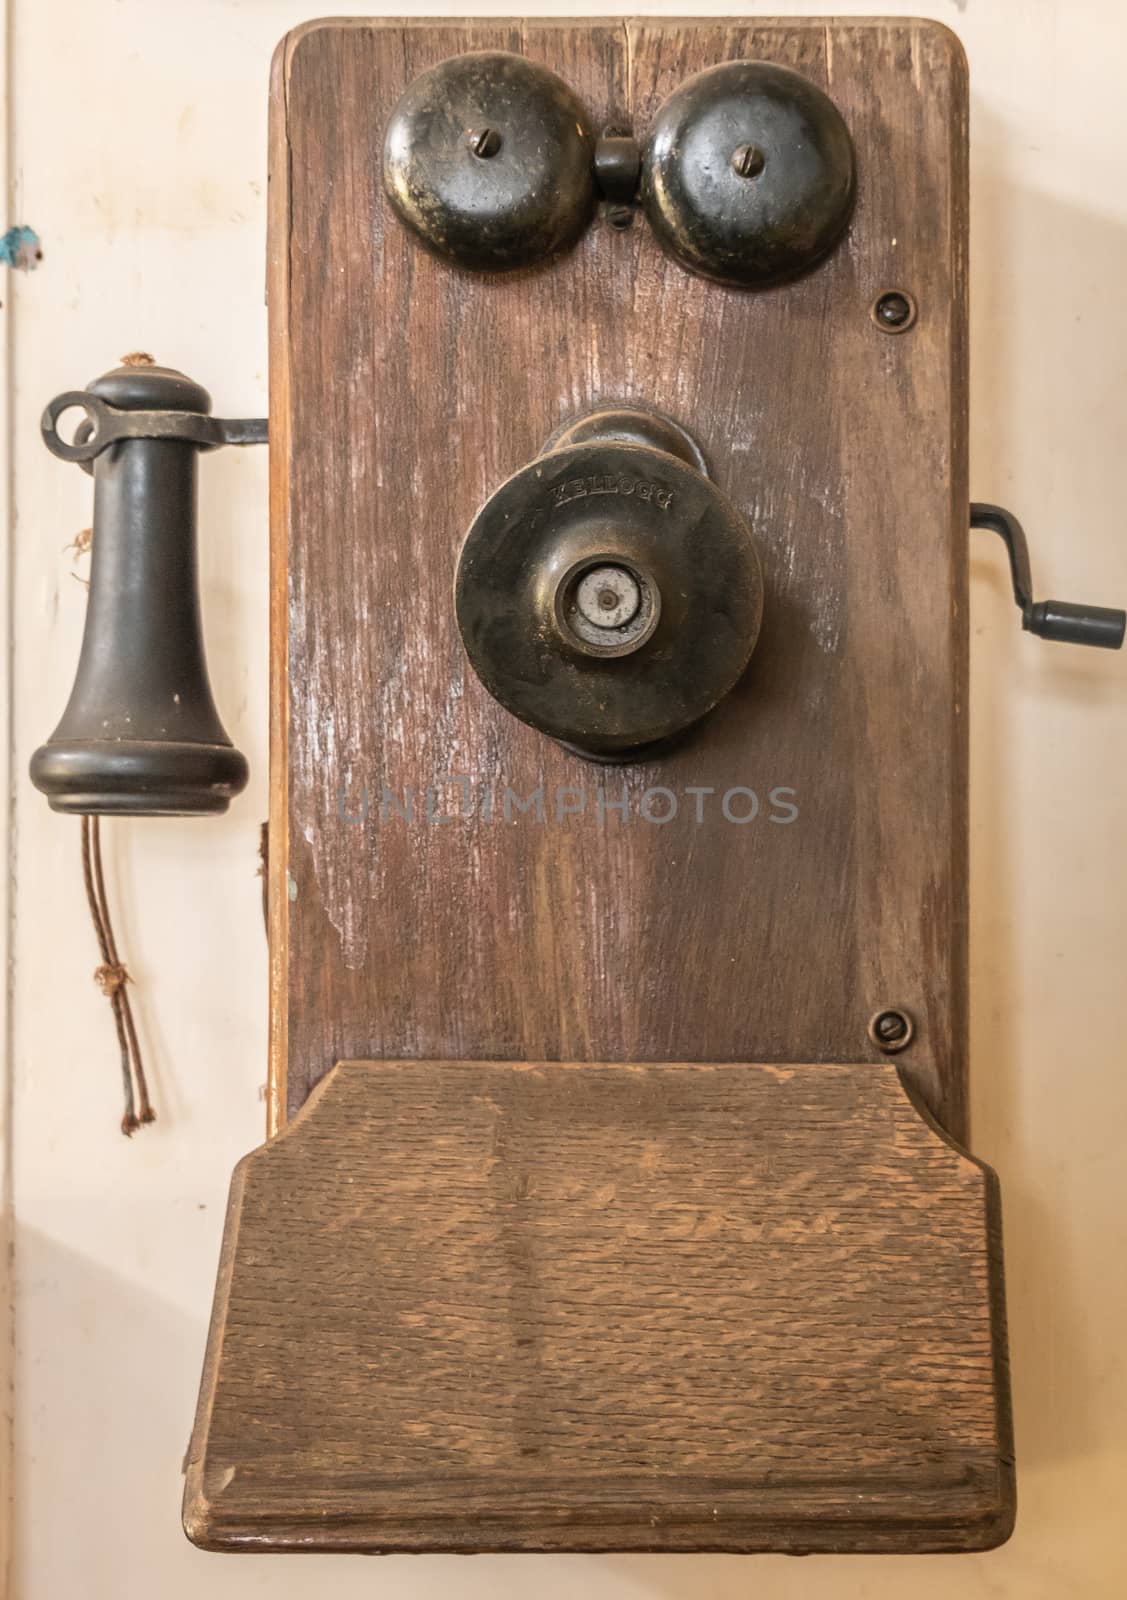 Waimea, Hawaii, USA. - January 15, 2020: Parker Ranch headquarters. Old telephone has metal bell, hear piece and handle to turn, all on brown wooden plank, fixed to beige wall.